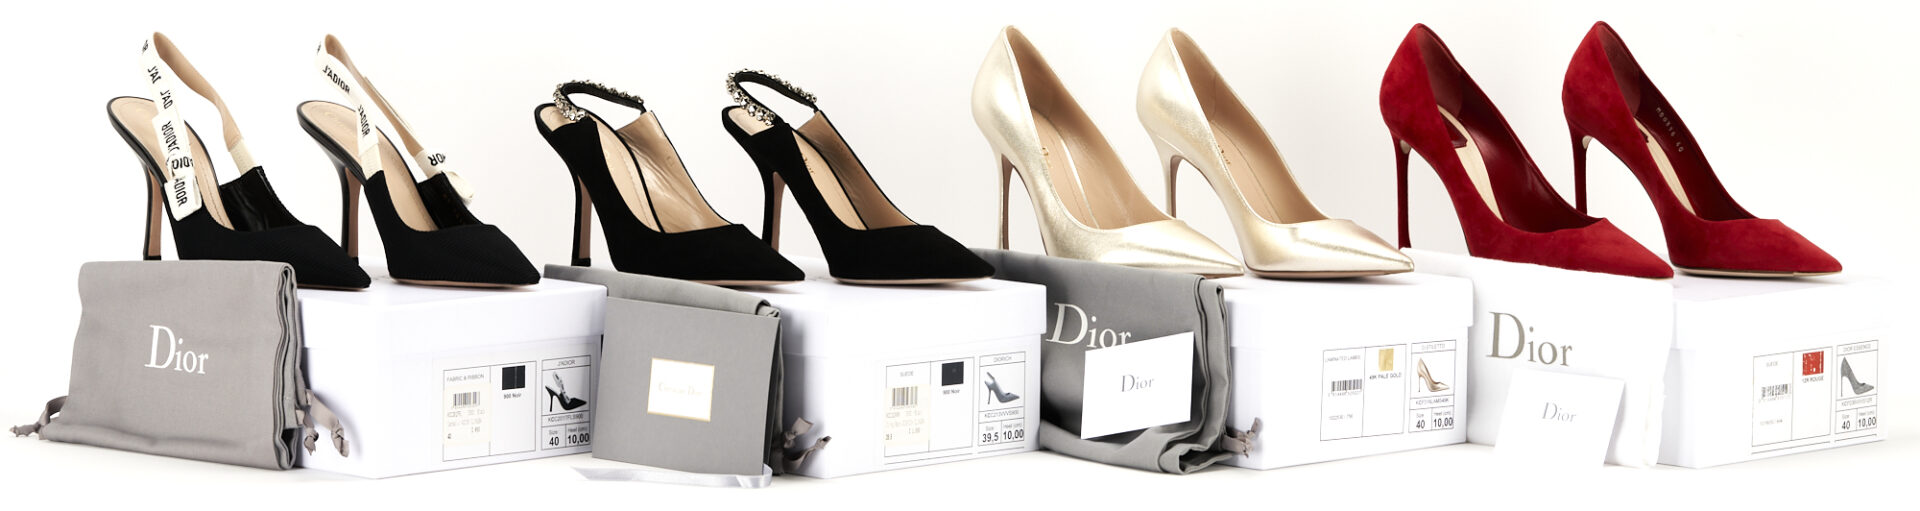 Lot 1201: 4 Pairs of Dior Pumps, incl. J'Adior & Diorich Slingback, D-Essence and D-Stiletto